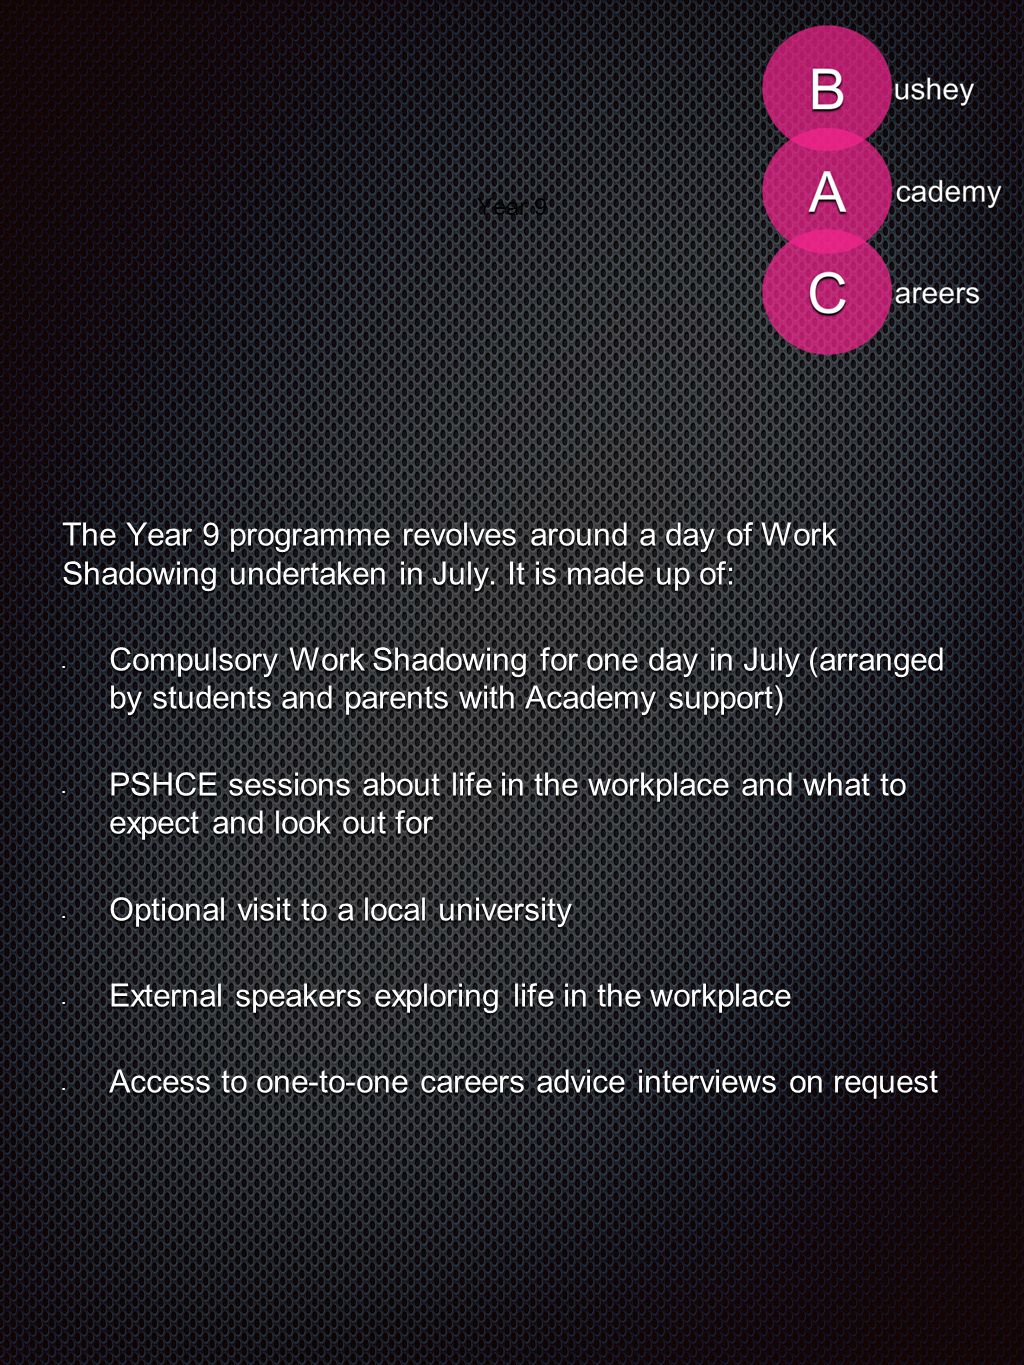 Year 9 The Year 9 programme revolves around a day of Work Shadowing undertaken in July.